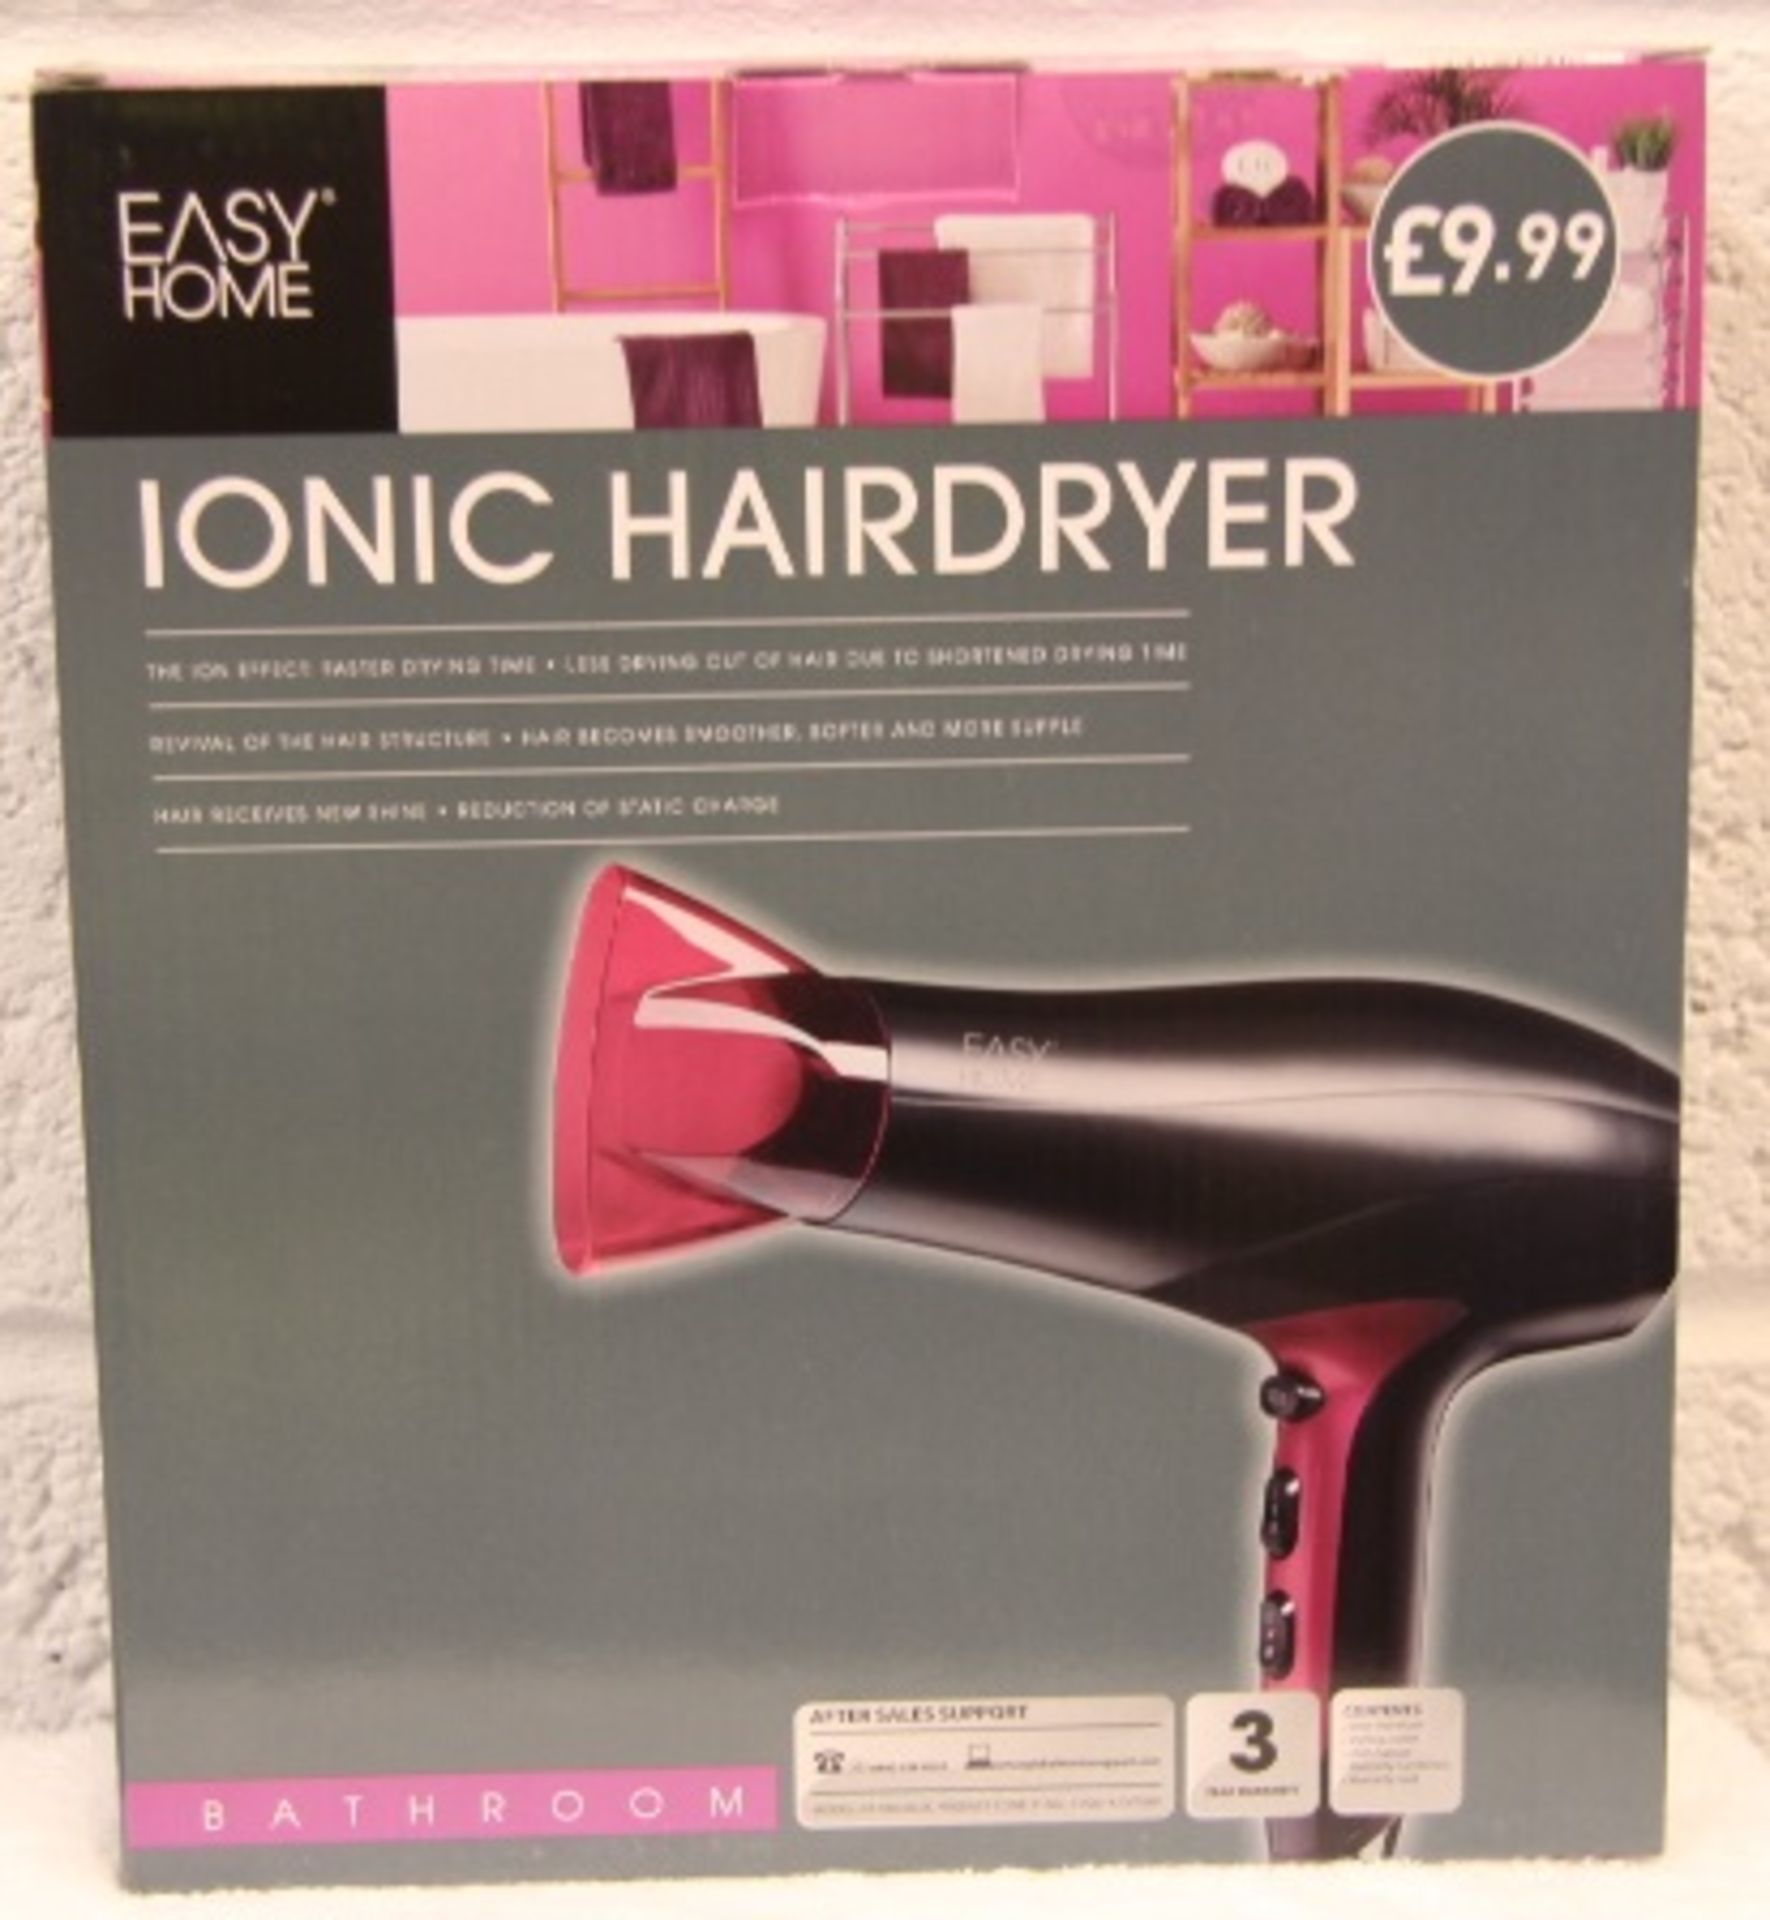 V *TRADE QTY* Brand New Easy Home Ionic Hairdryer-Faster Drying-Revival Of The Hair Structure X 3